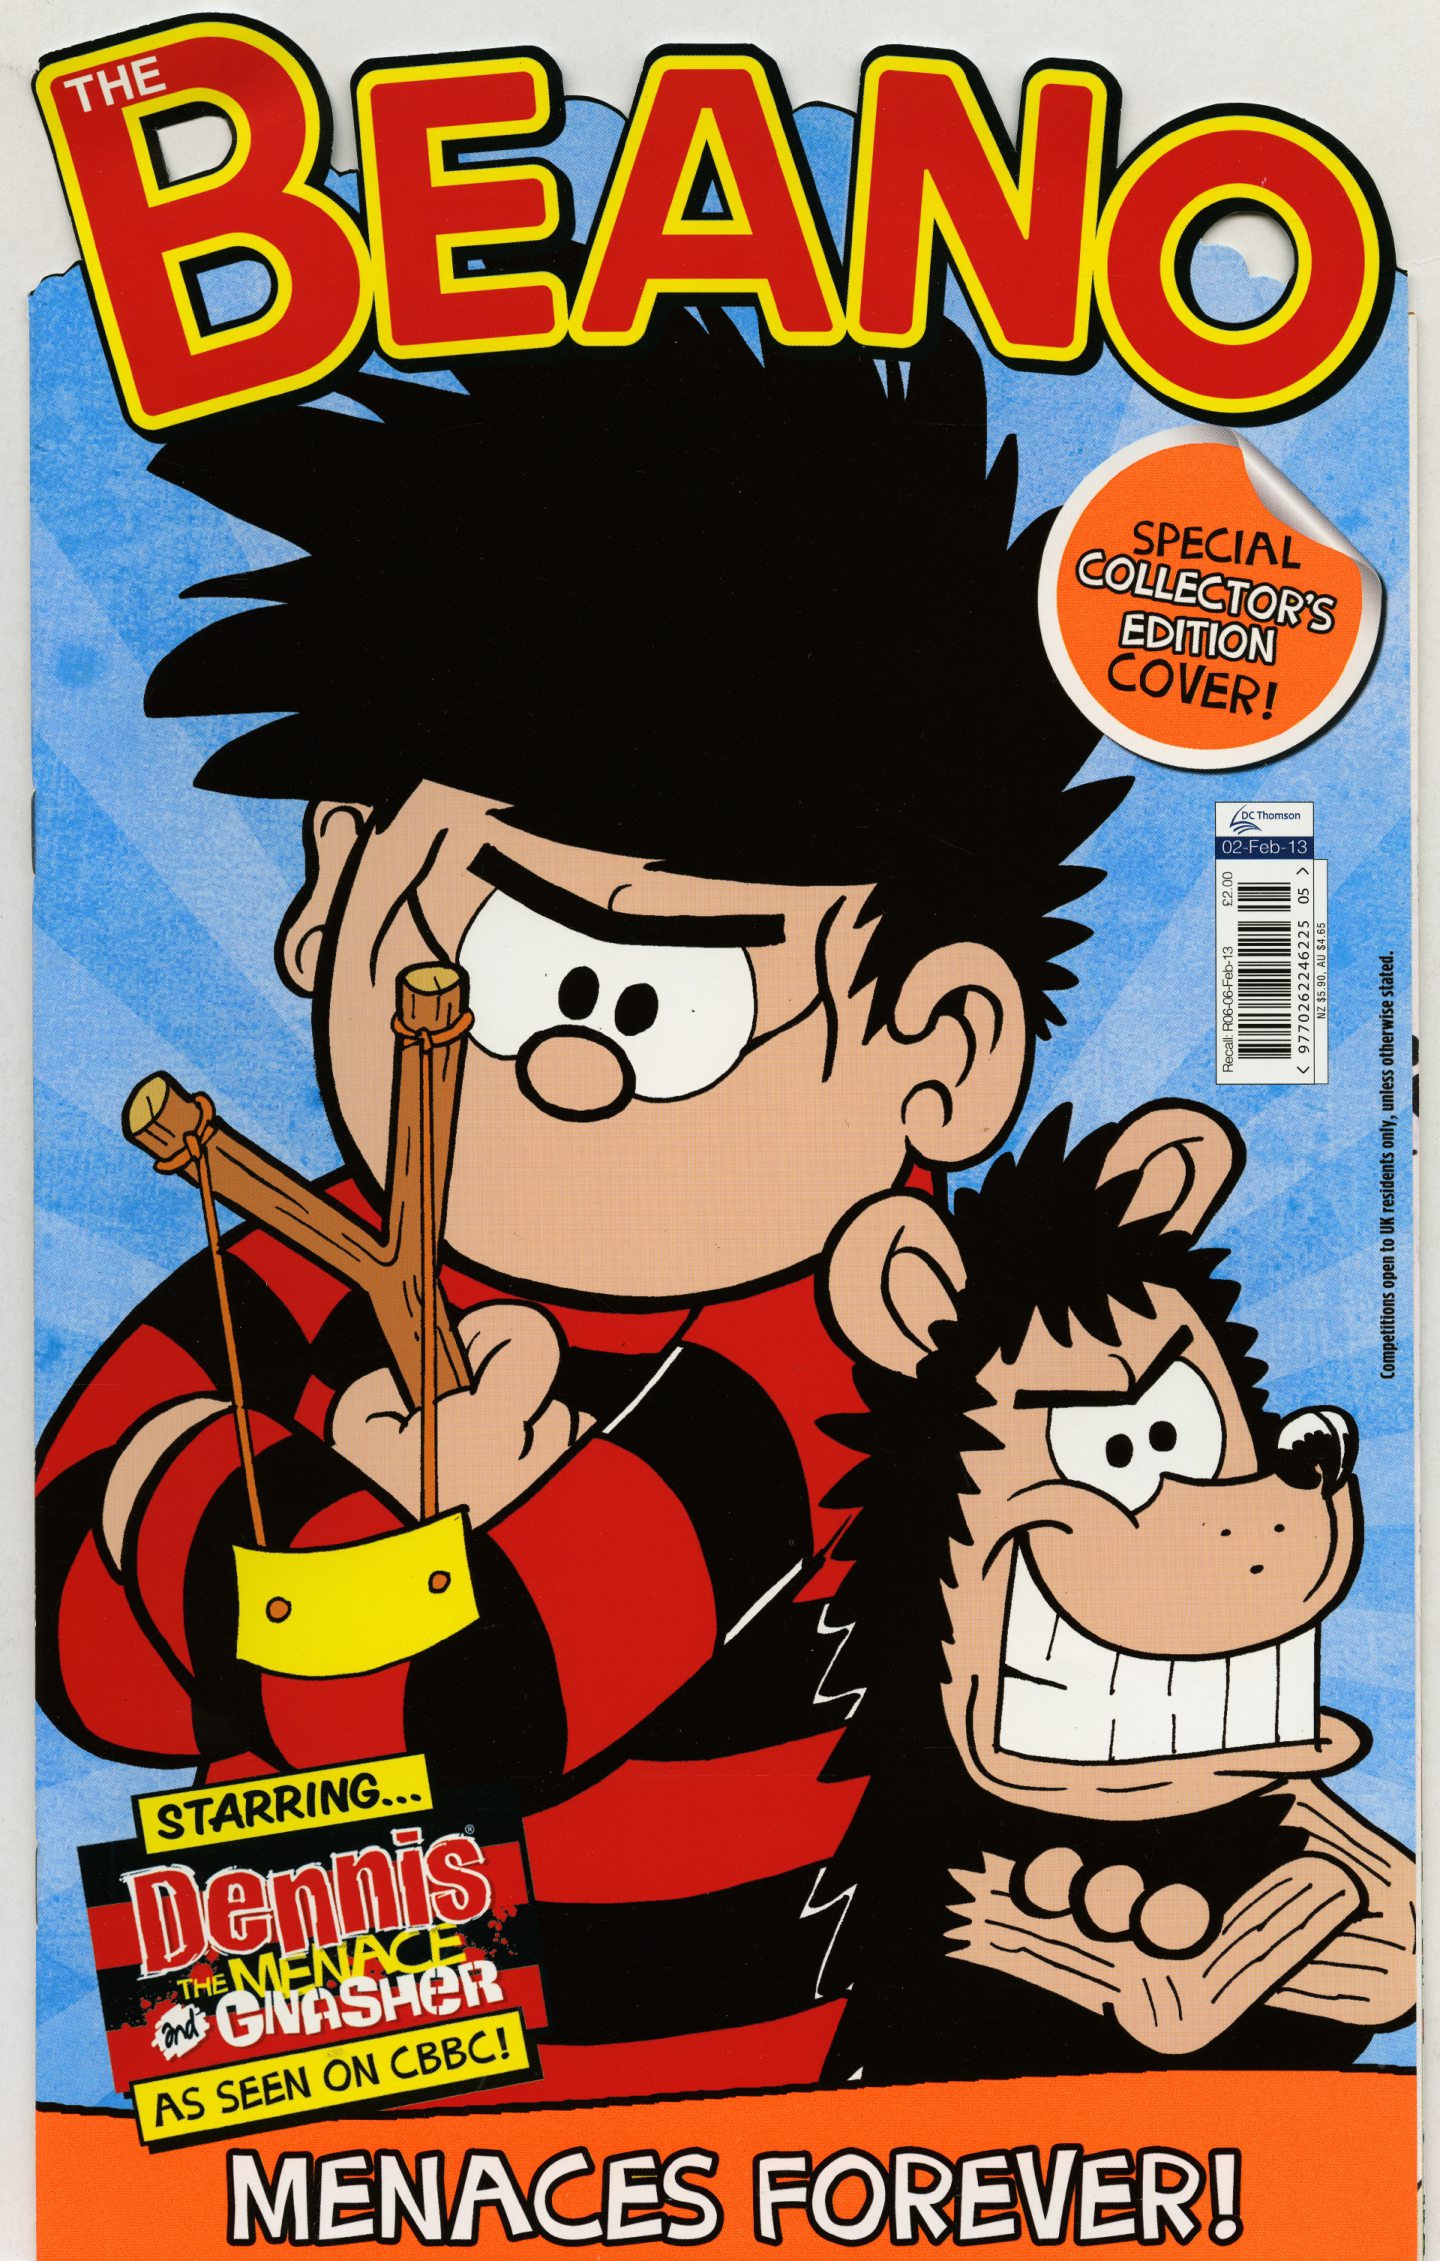 The cover of an edition of The Beaon, featuring Dennis and Gnasher